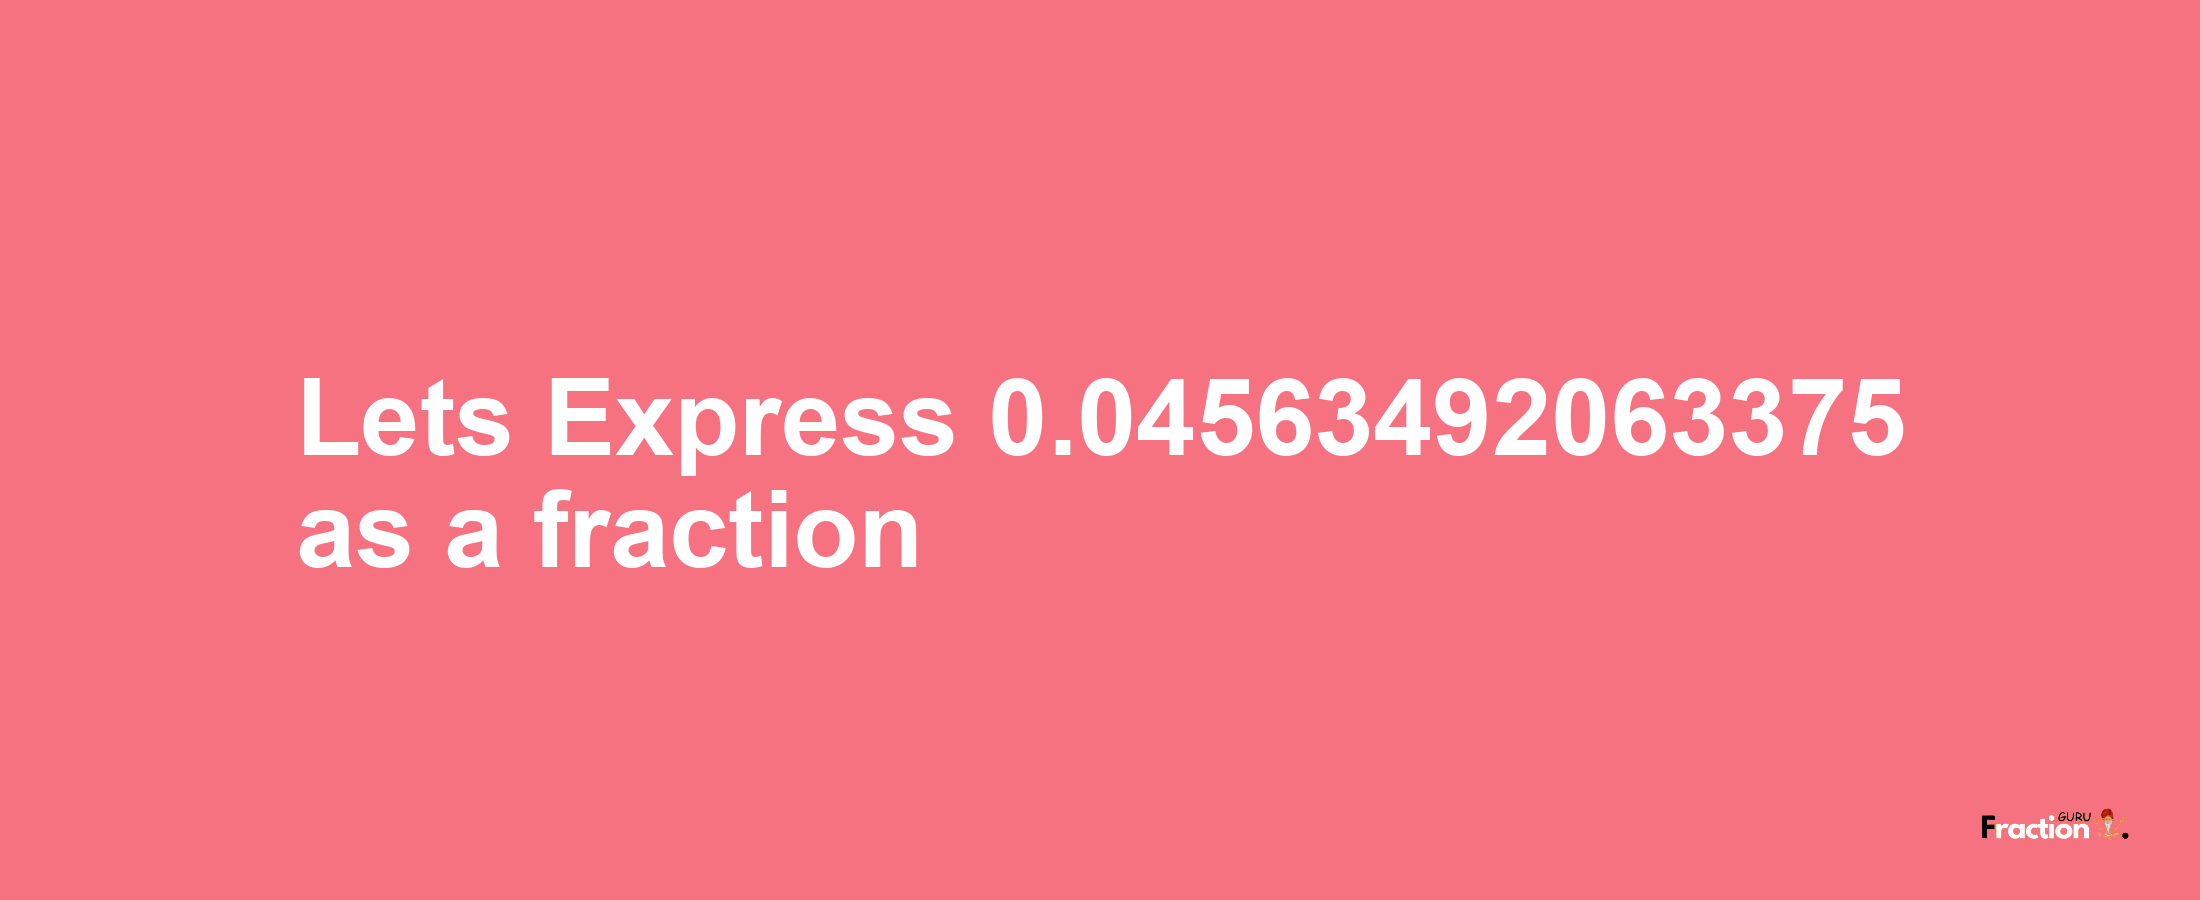 Lets Express 0.04563492063375 as afraction